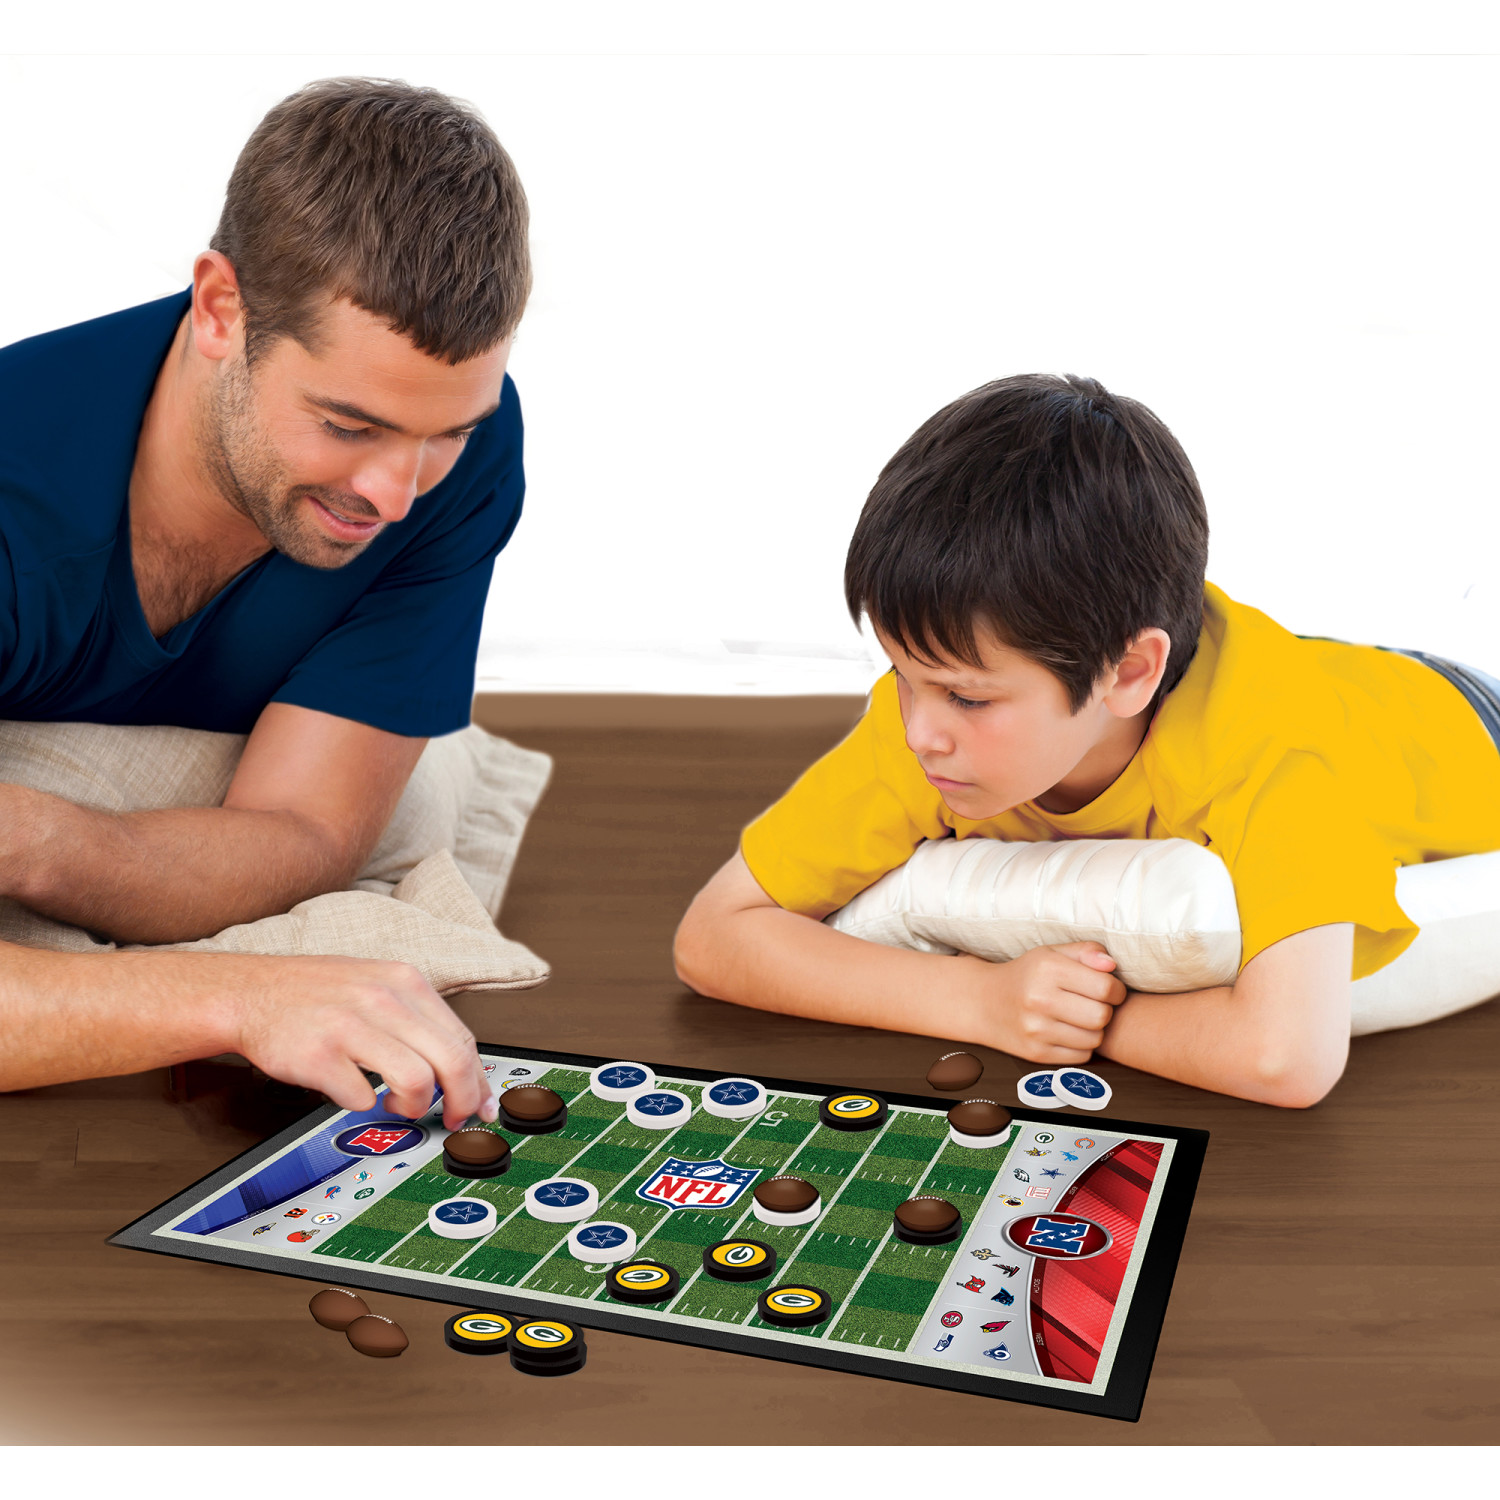 MasterPieces Officially licensed NFL League-NFL Checkers Board Game for Families and Kids ages 6 and Up - image 5 of 5